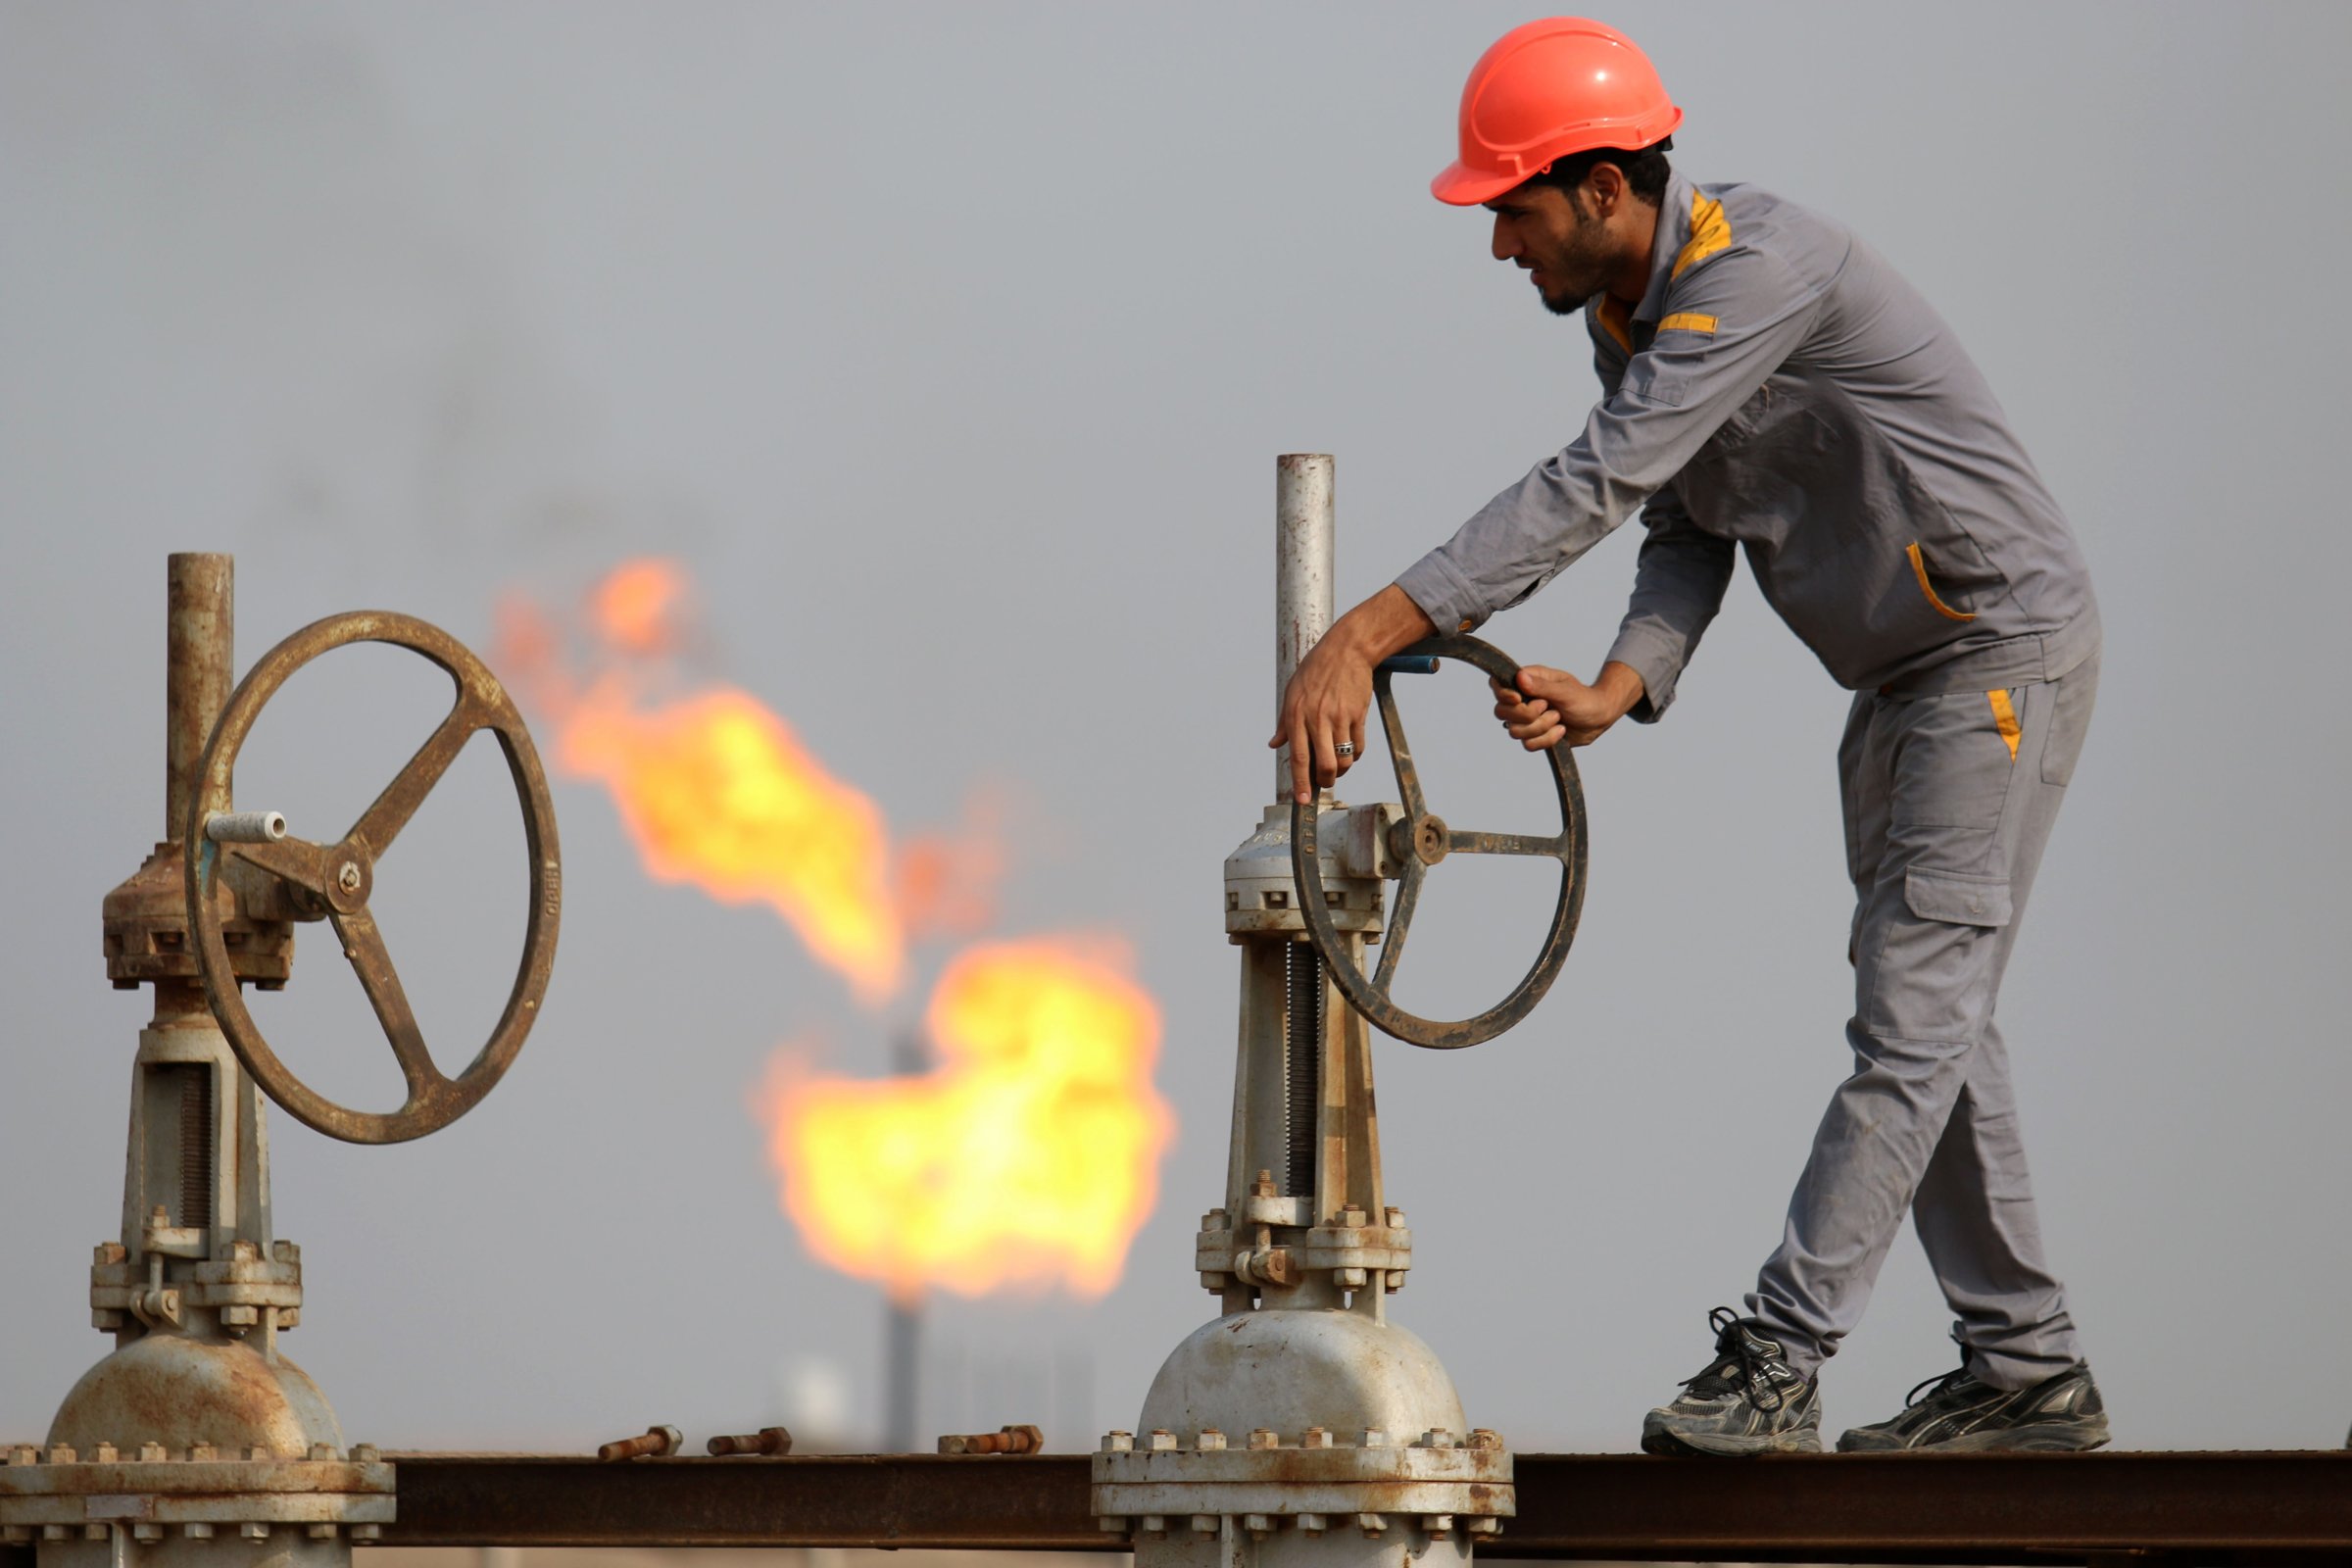 An Iraqi labourer works at an oil refinery in the southern town Nasiriyah on October 30, 2015.